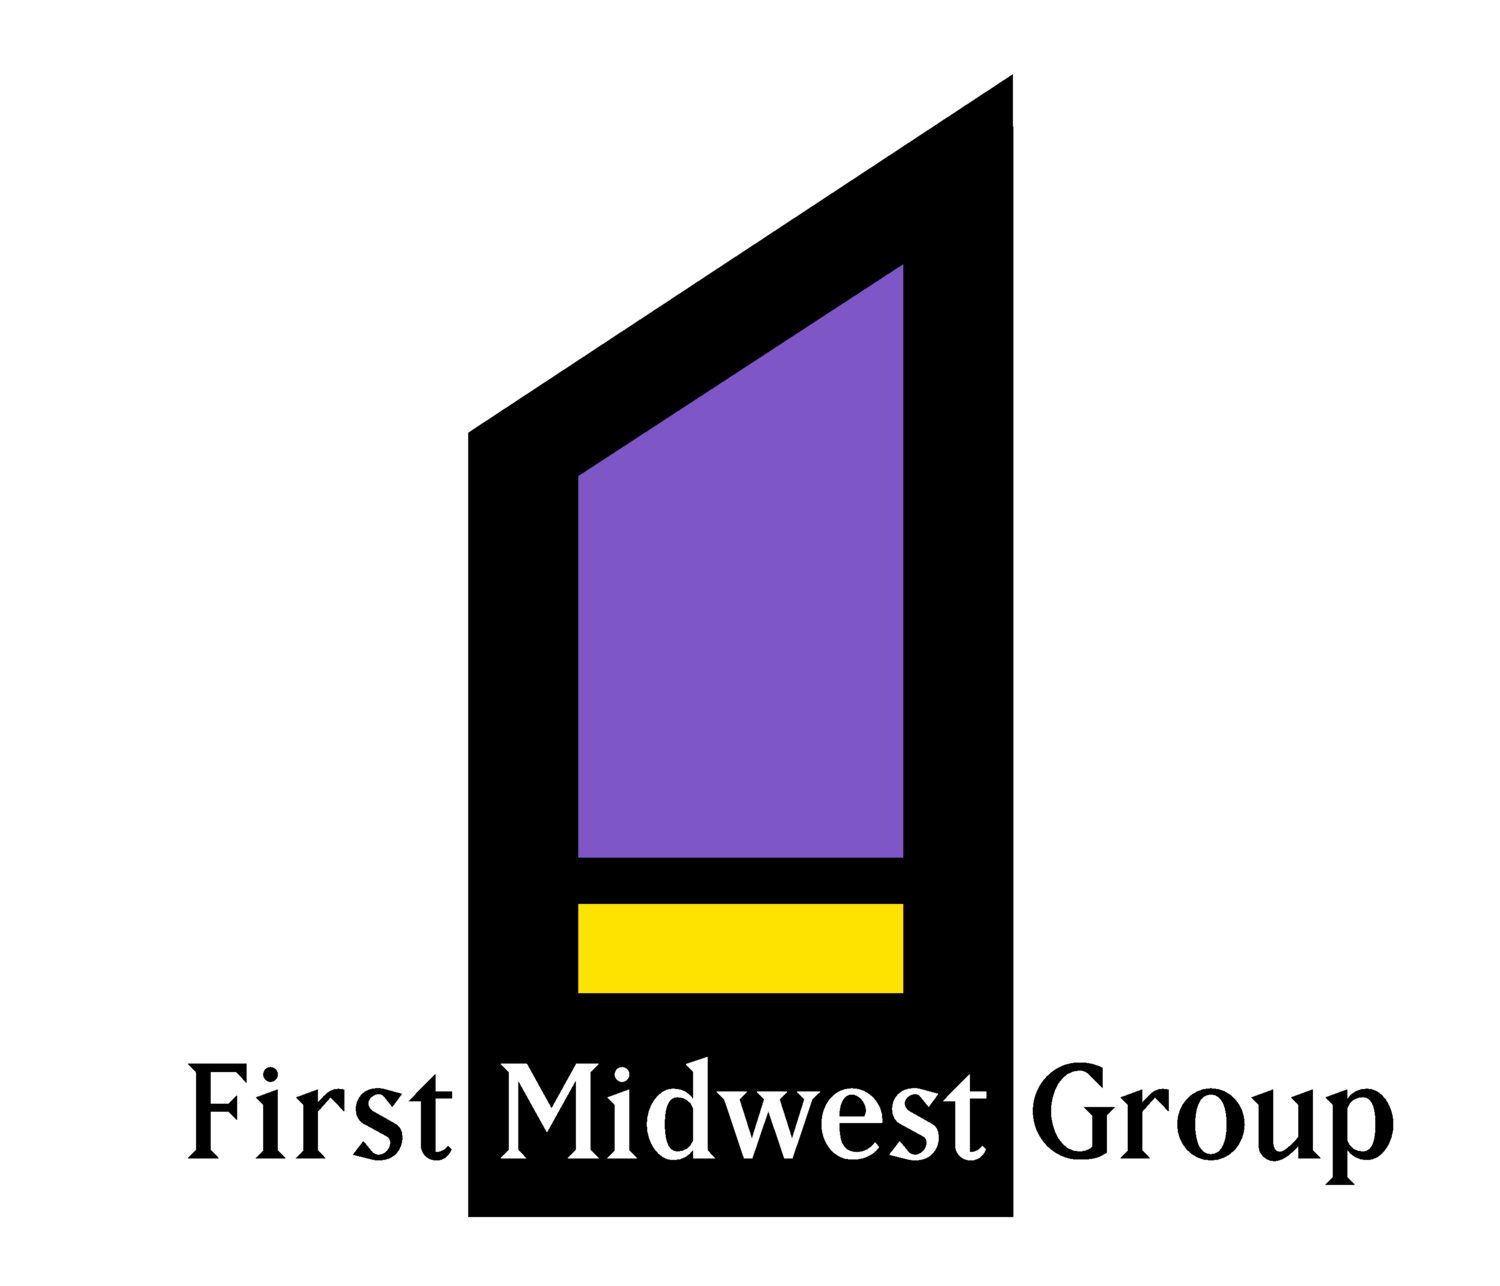 First Midwest Group